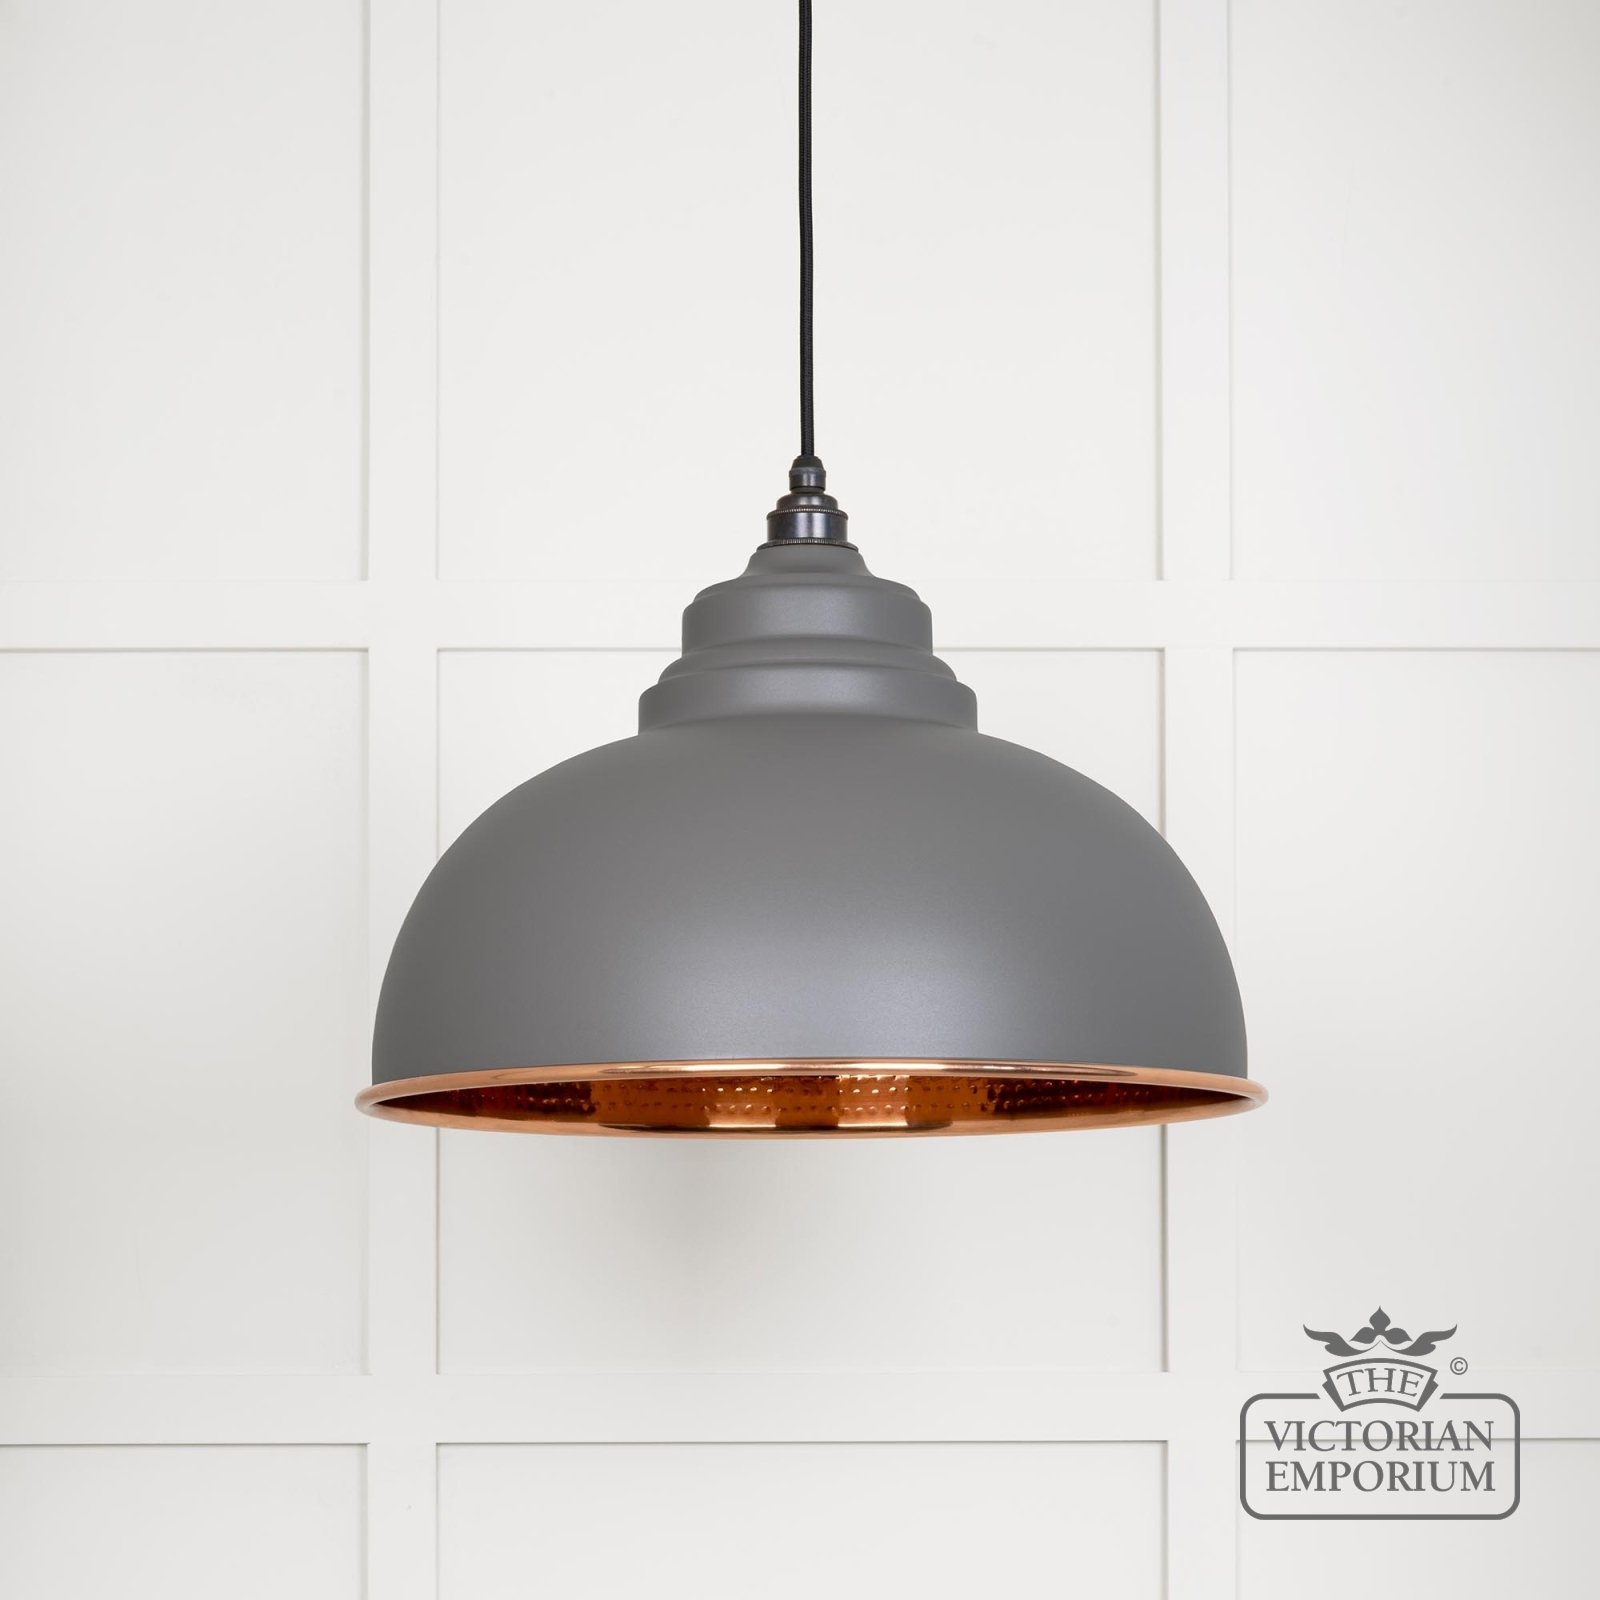 Harlow Pendant Light in Bluff with Hammered Copper Interior